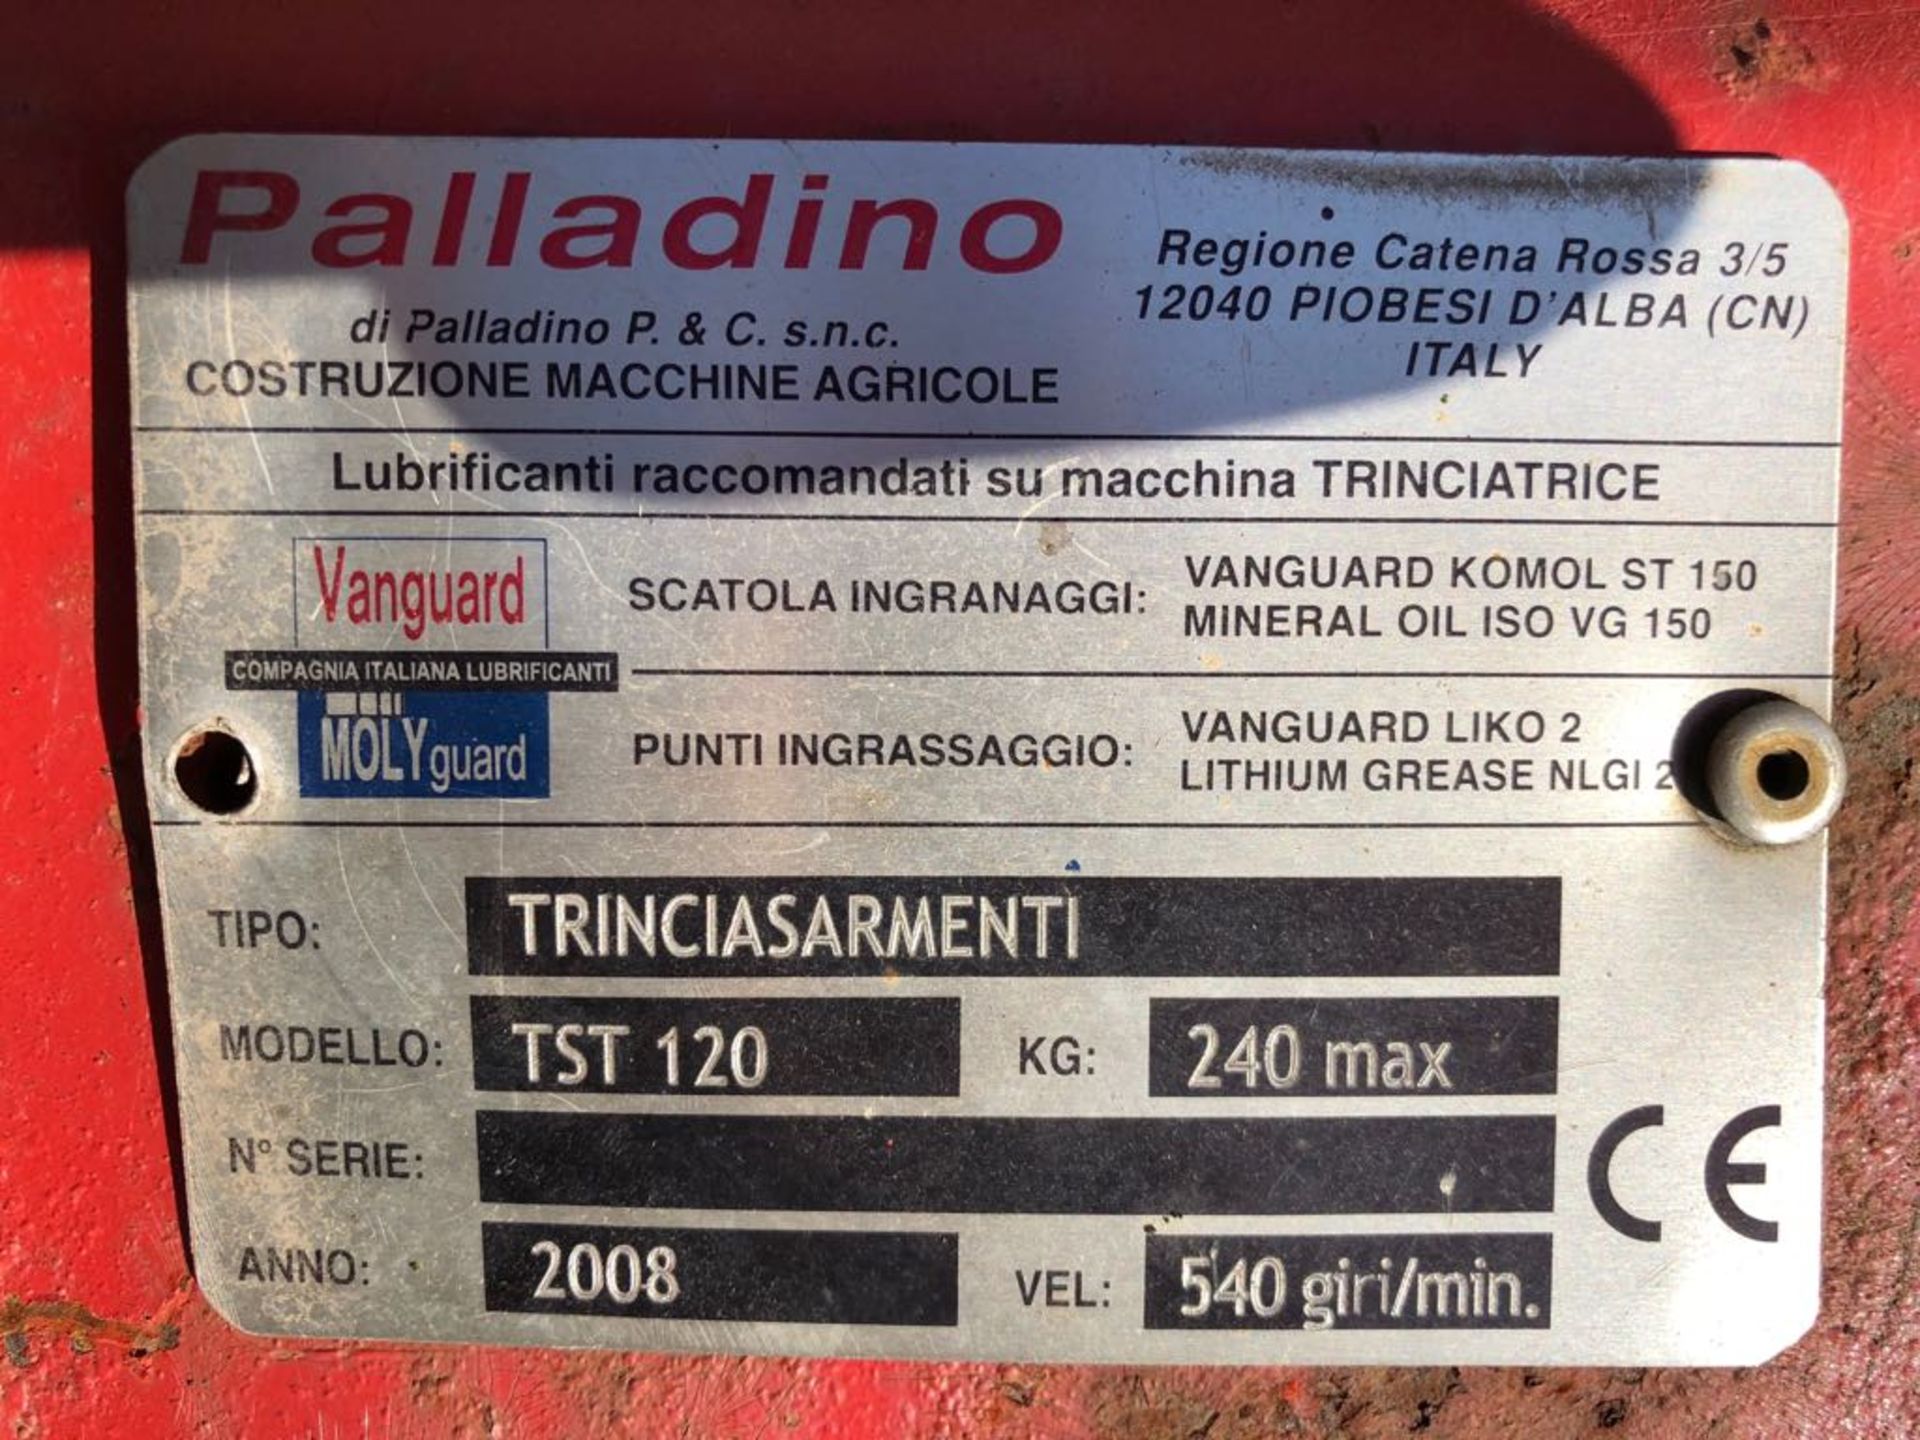 2008 PALLADINO TRINCIASARMENTI 4FT FLAIL MOWER WITH HEAVY DUTY BLADES FOR A COMPACT TRACTOR - Image 6 of 10